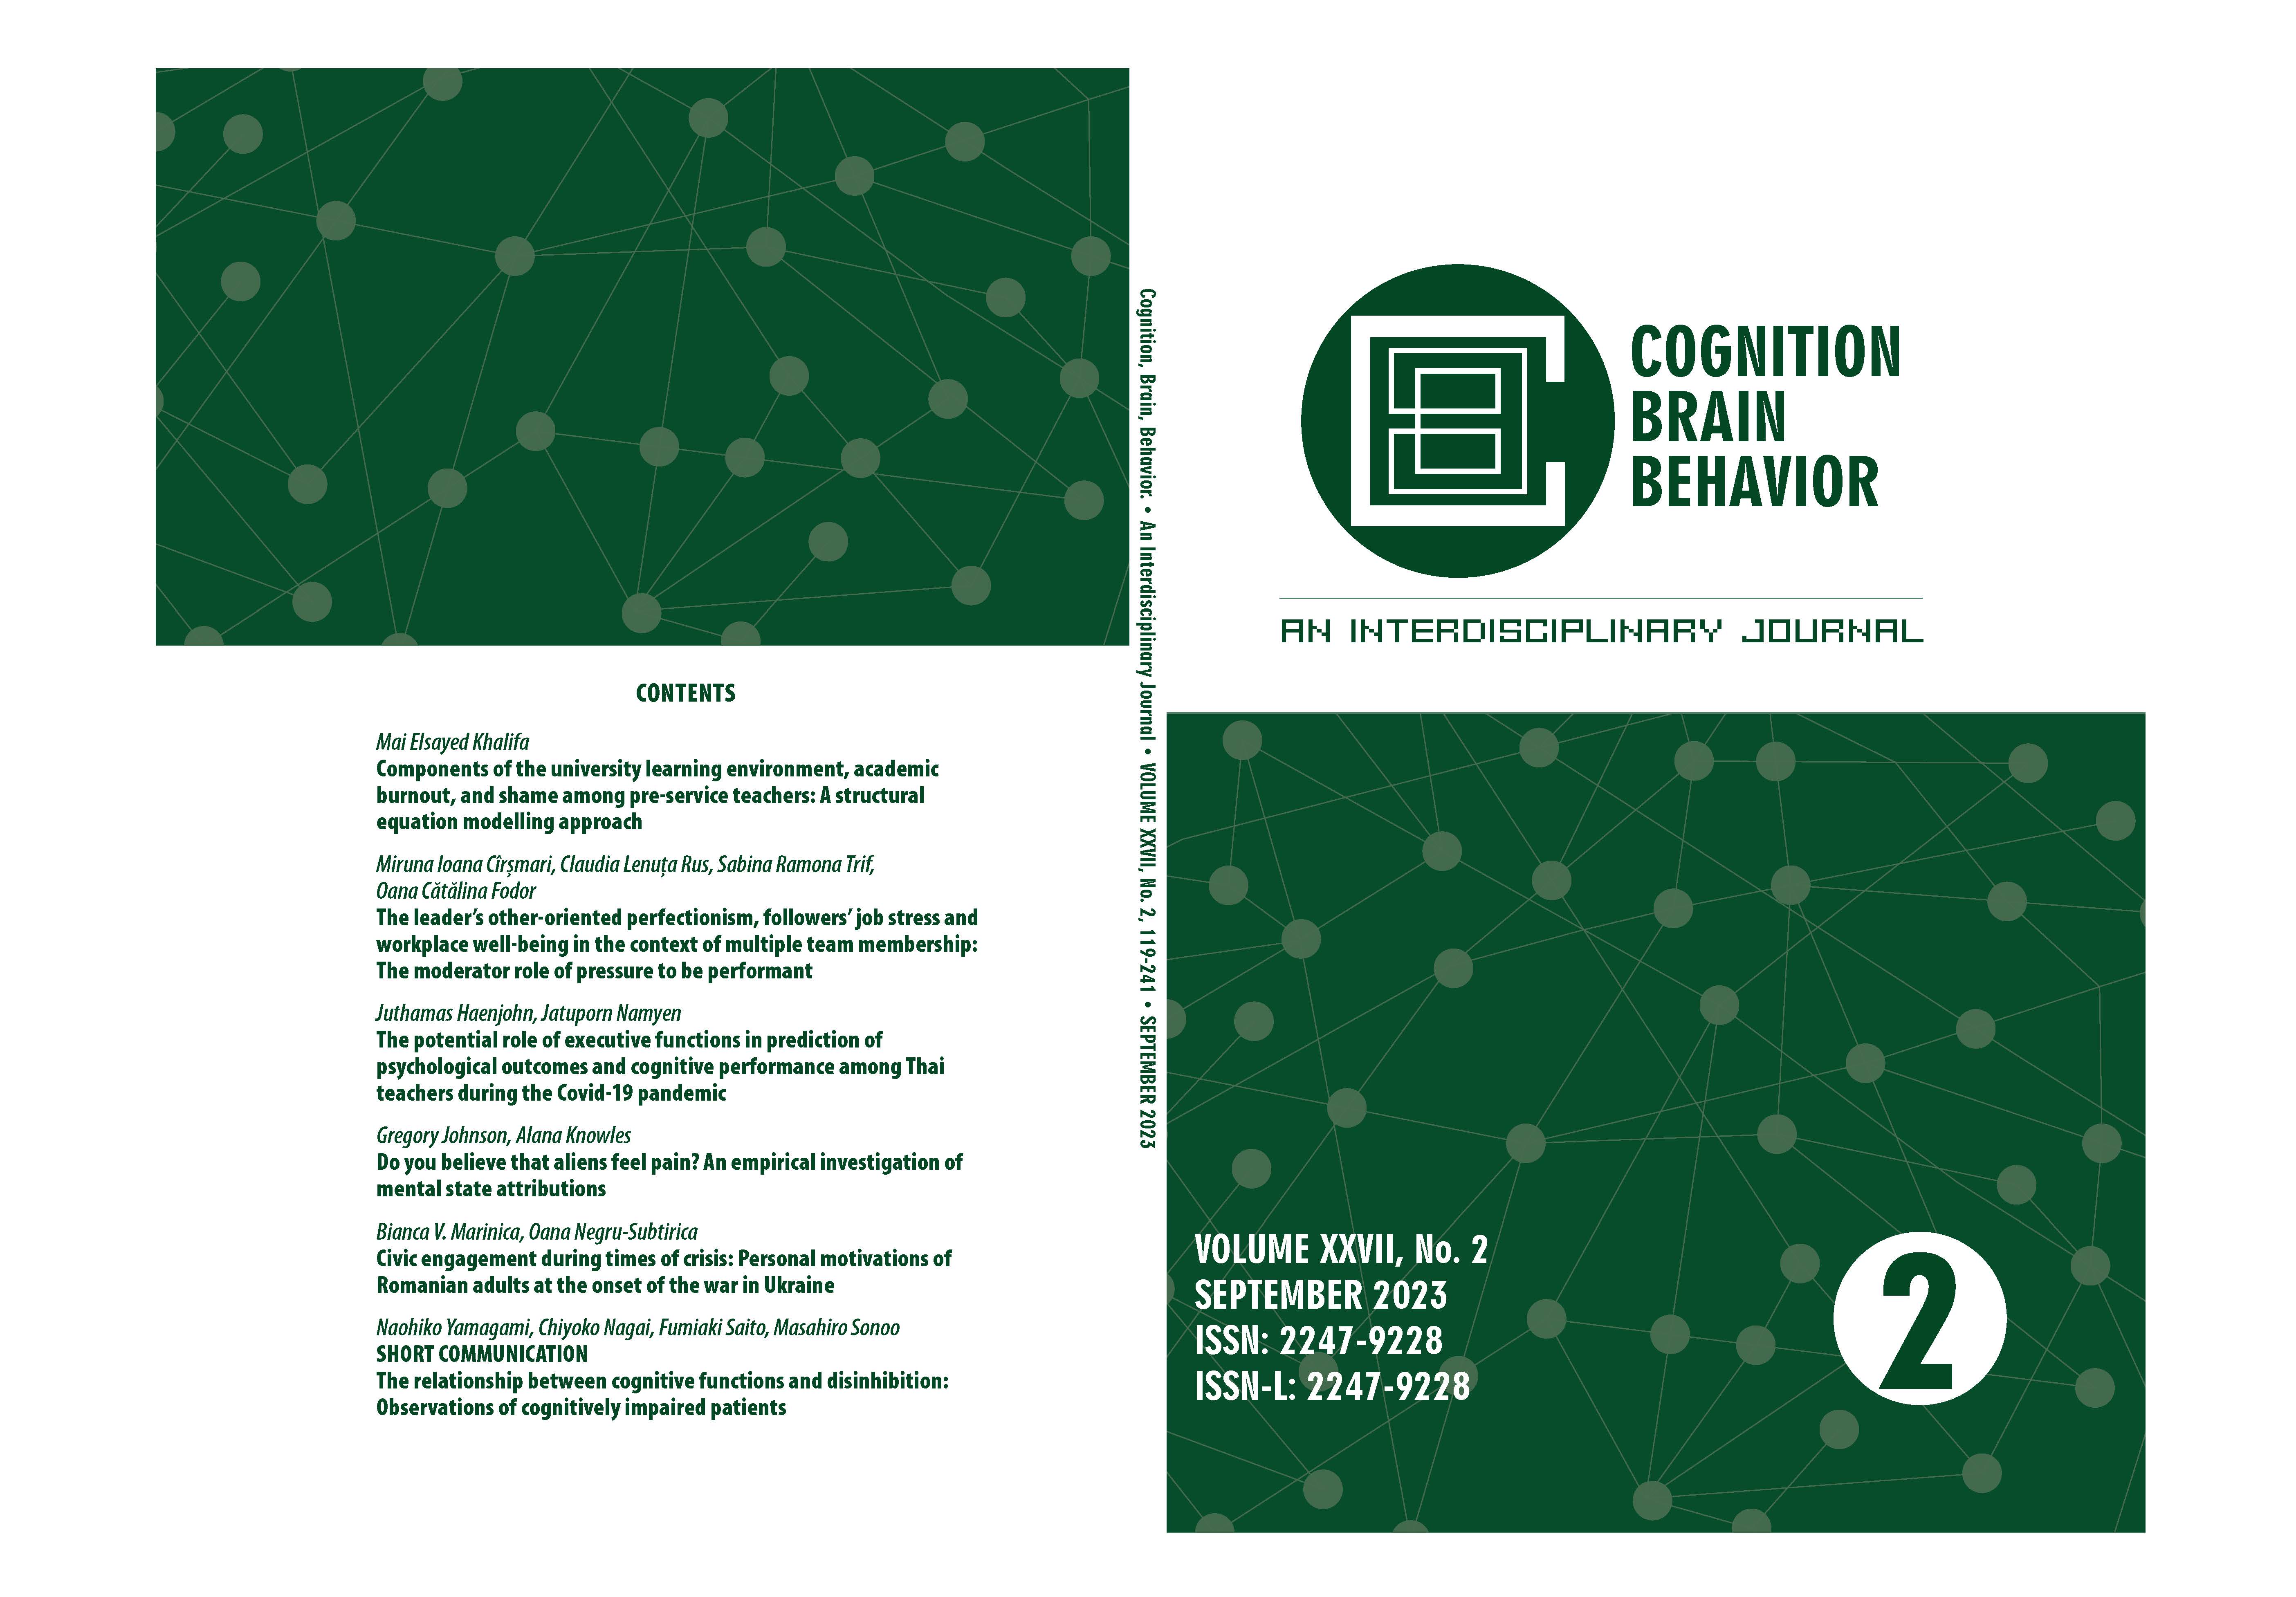 The potential role of executive functions in prediction of psychological outcomes and cognitive performance among Thai teachers during the Covid-19 pandemic